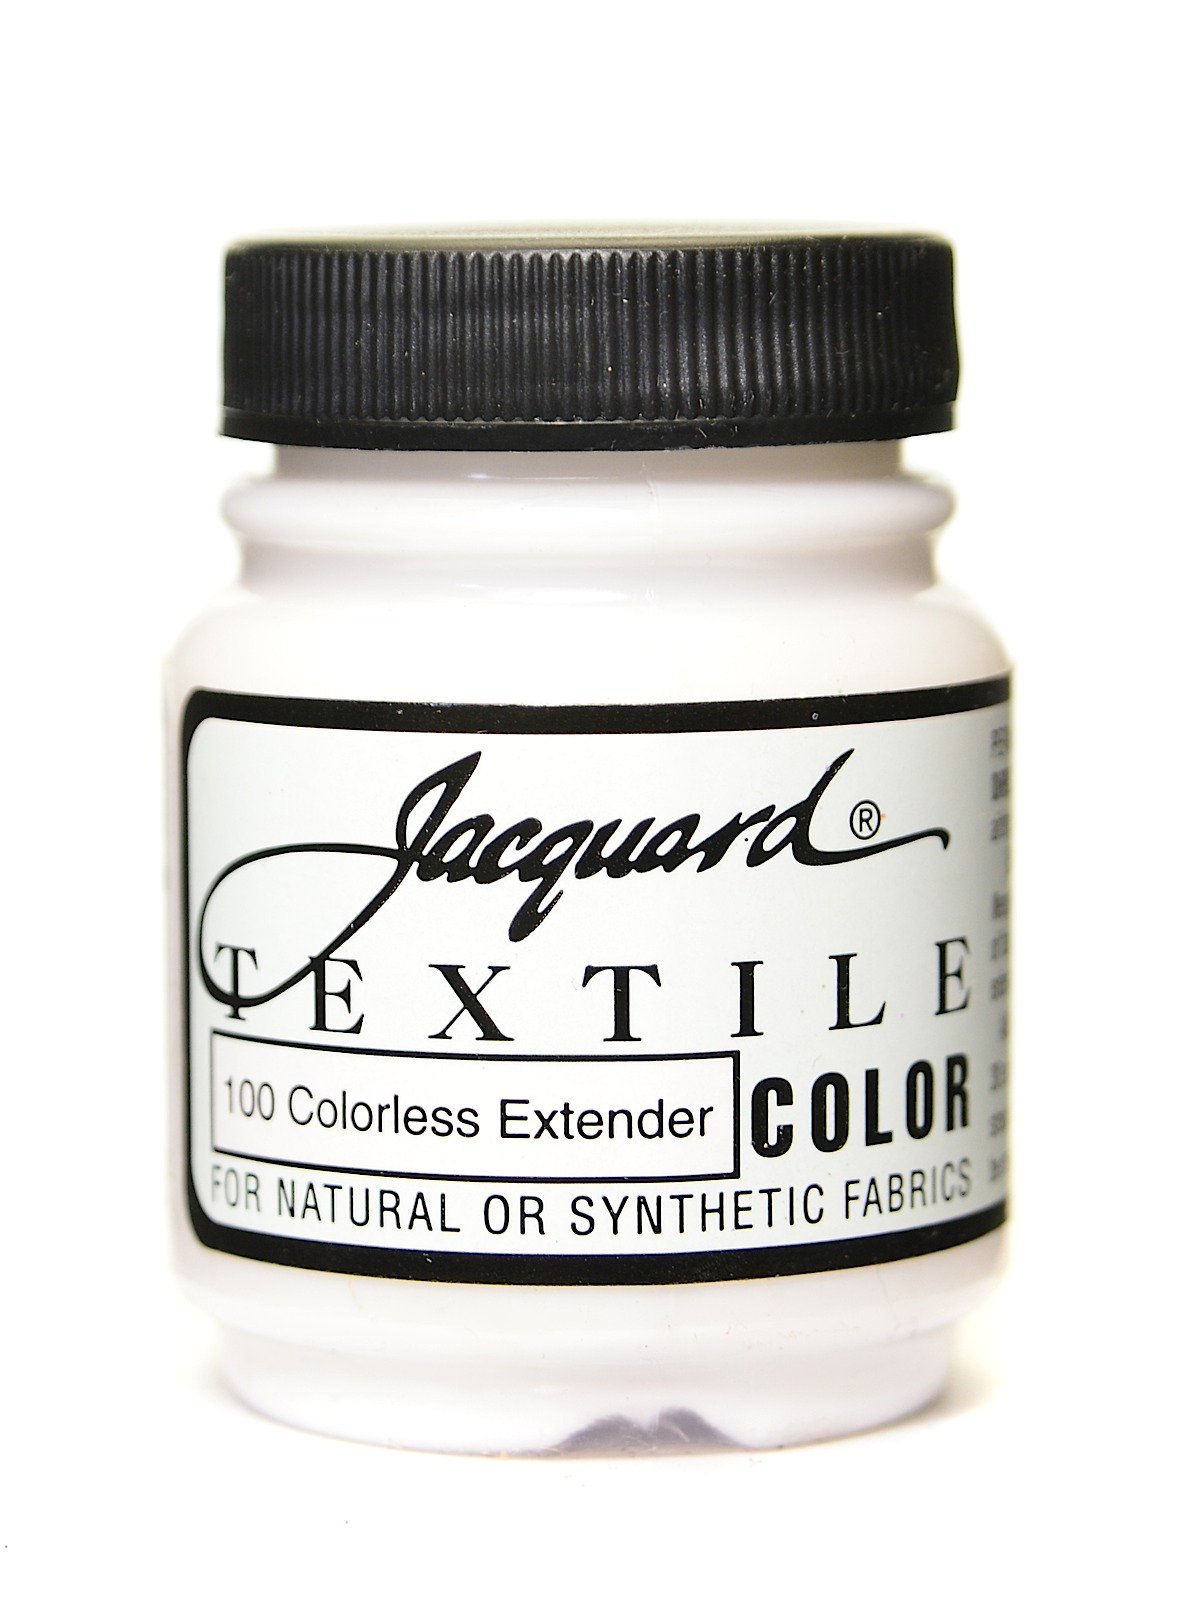 Jacquard Textile Color ☆ Fabric Paint for Perfect Results ☆